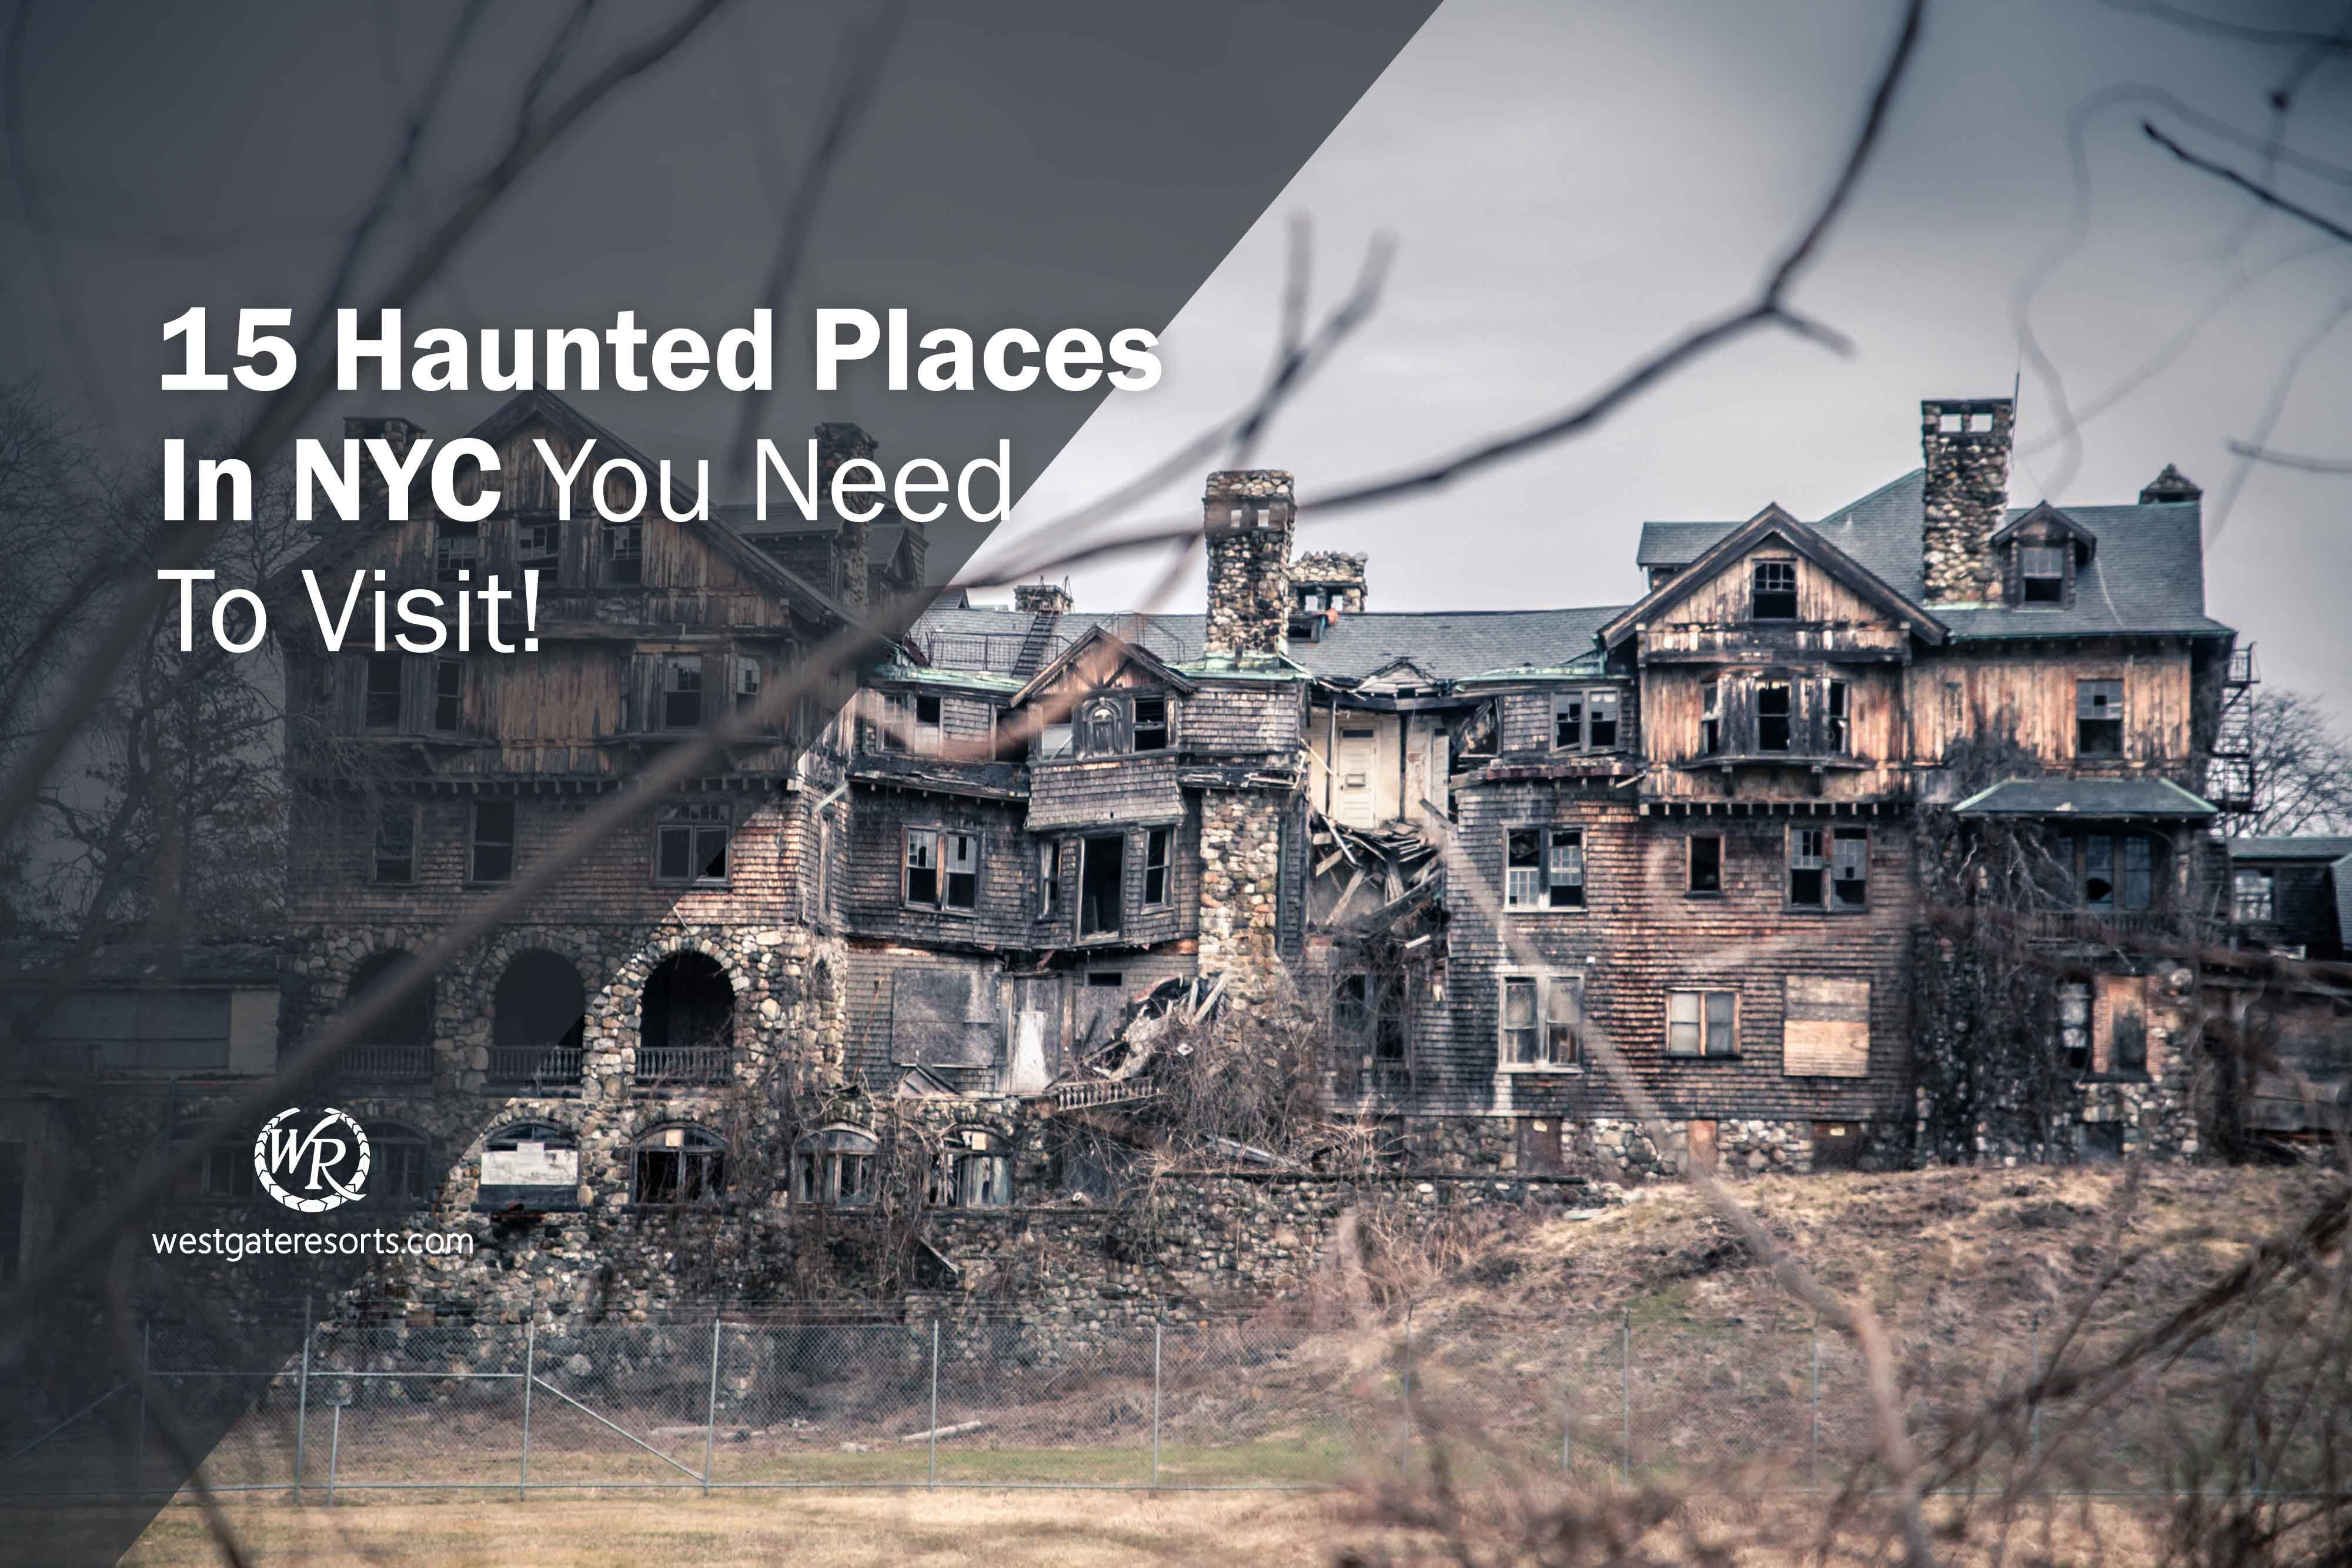 15 Haunted Places In NYC You Need To Visit | Haunted Places in NYC